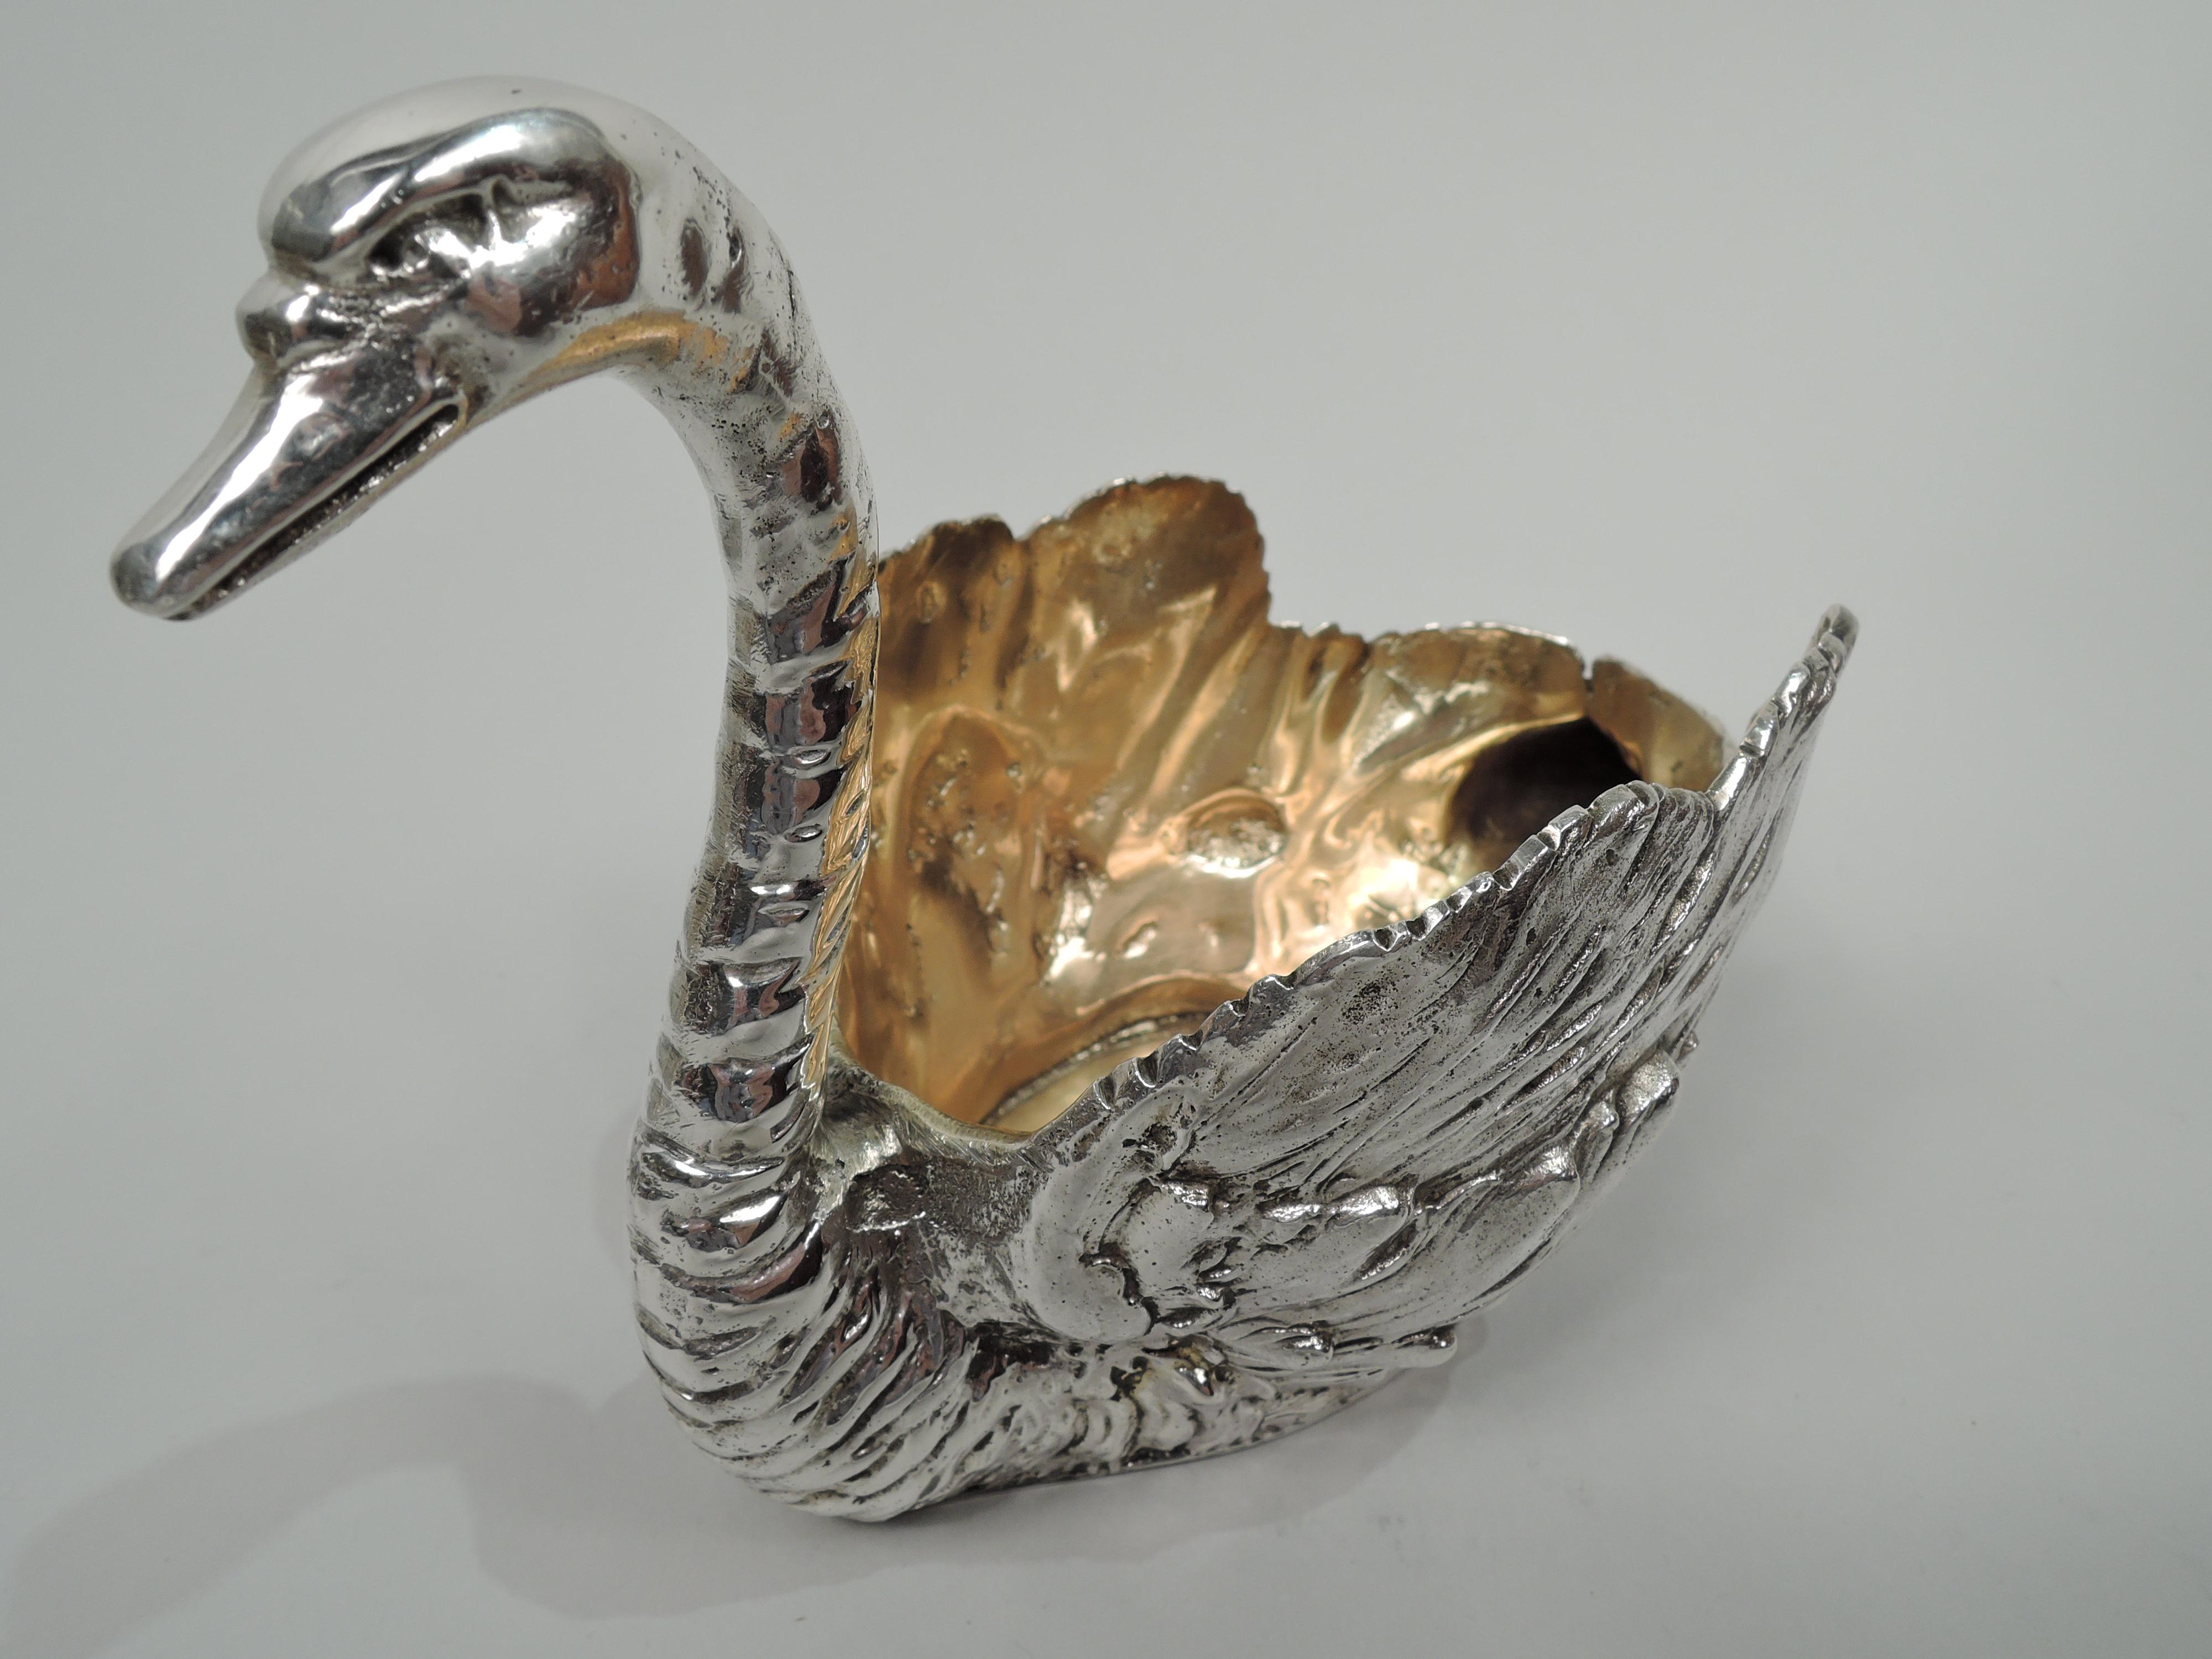 Pair of European 900 silver figural bird bowls, circa 1900. Each: Swan with plumy wings and tail and ringed S-scroll neck with graceful head terminating in long and closed bill. Hollow gilt-washed interior for holding treats. Marked. Heavy total